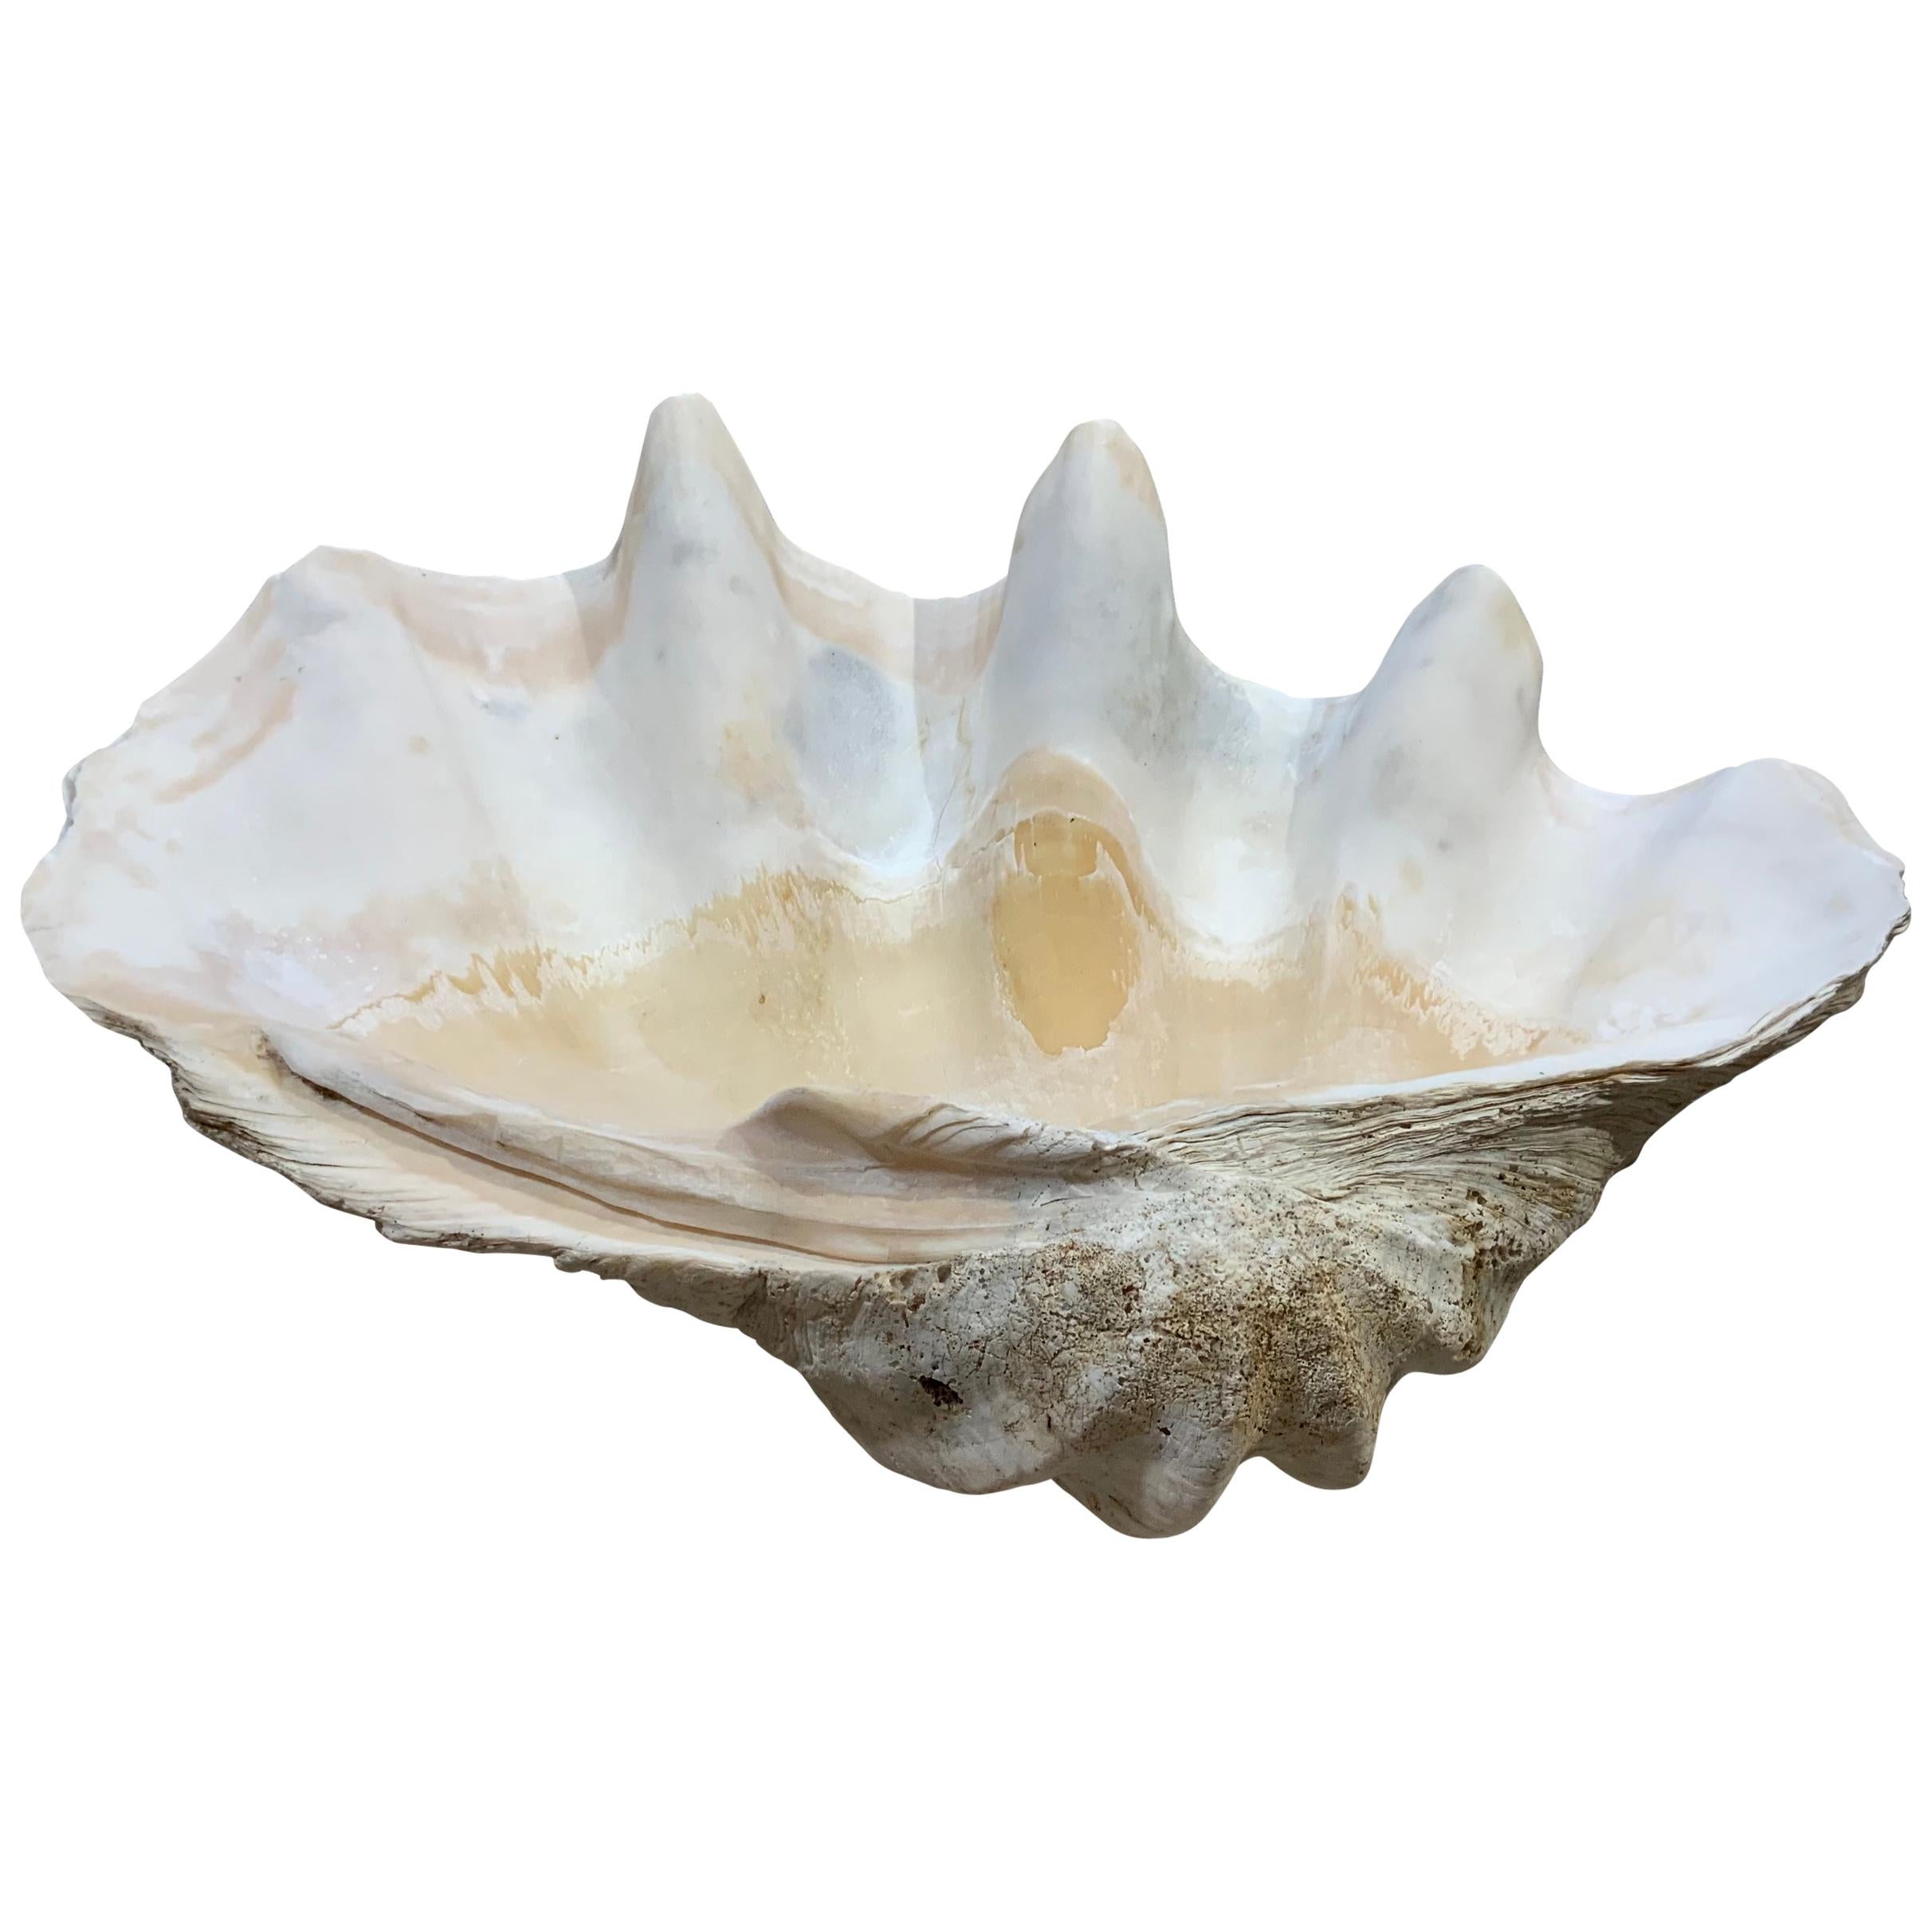 Large Natural Marine Shell Tridacna Clam Conch Home Furnishing Giant Sea 15-17cm 